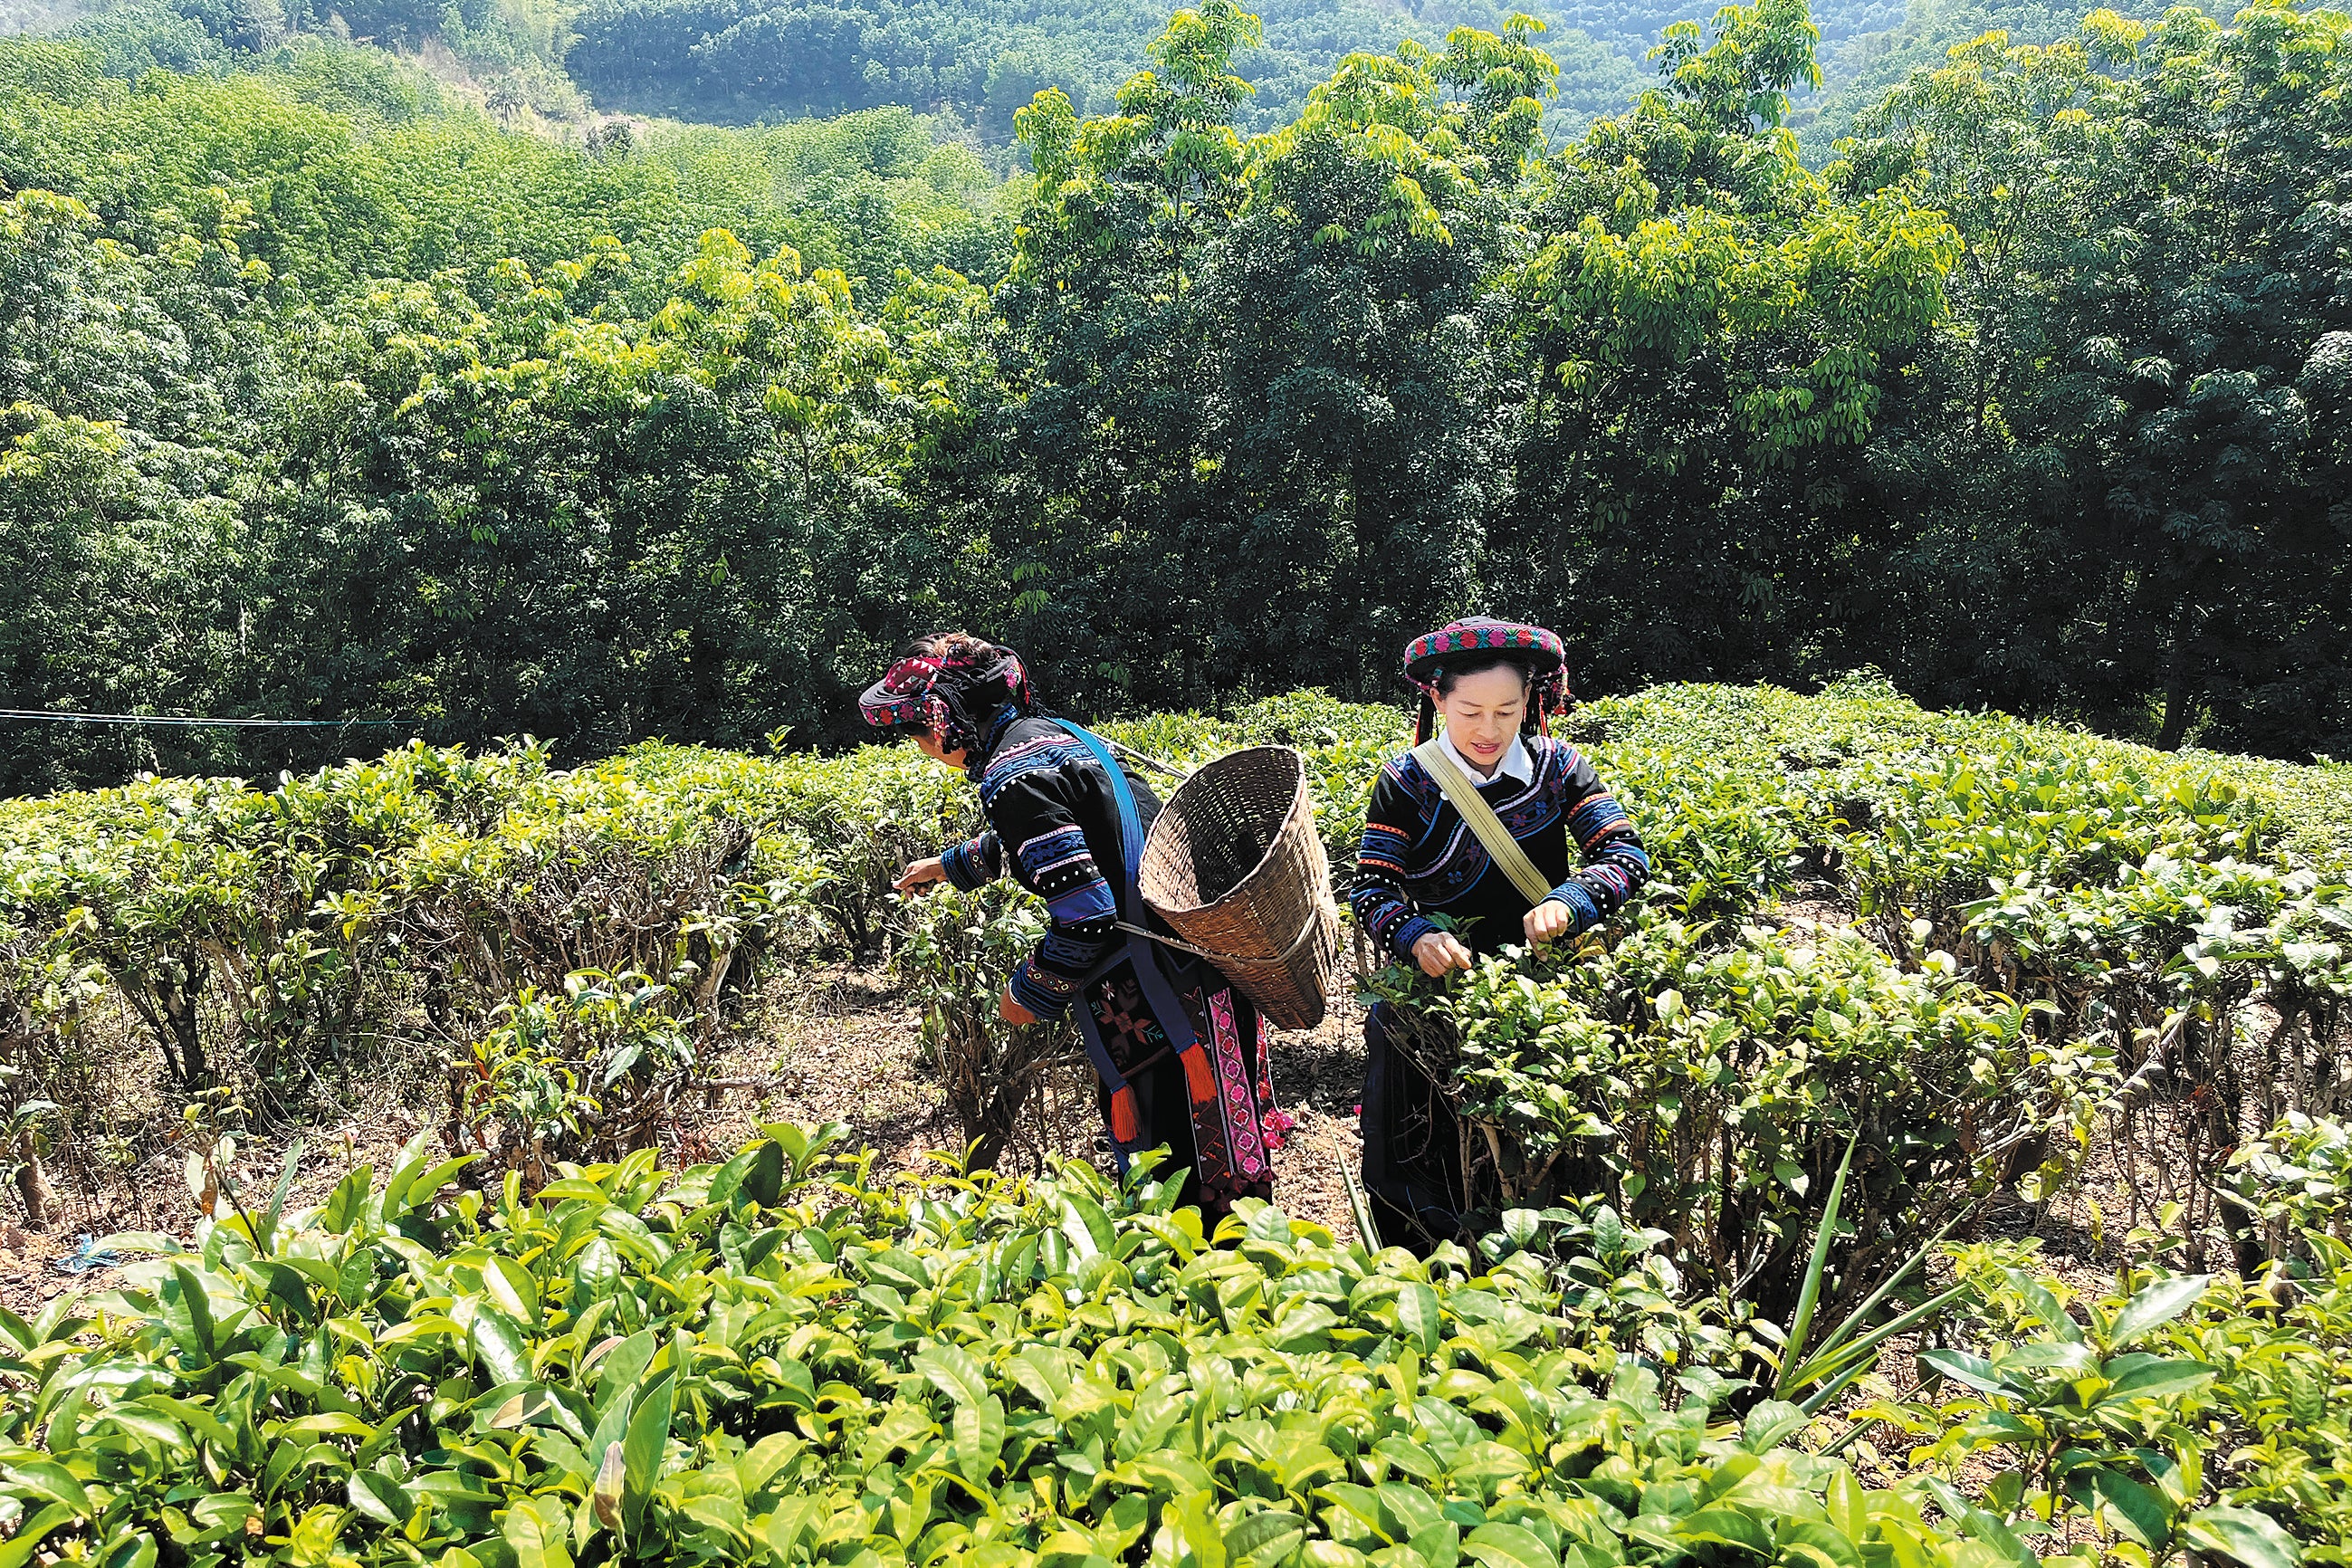 Villagers harvest tea leaves in the Konggeliudui community in Jinghong, Yunnan province